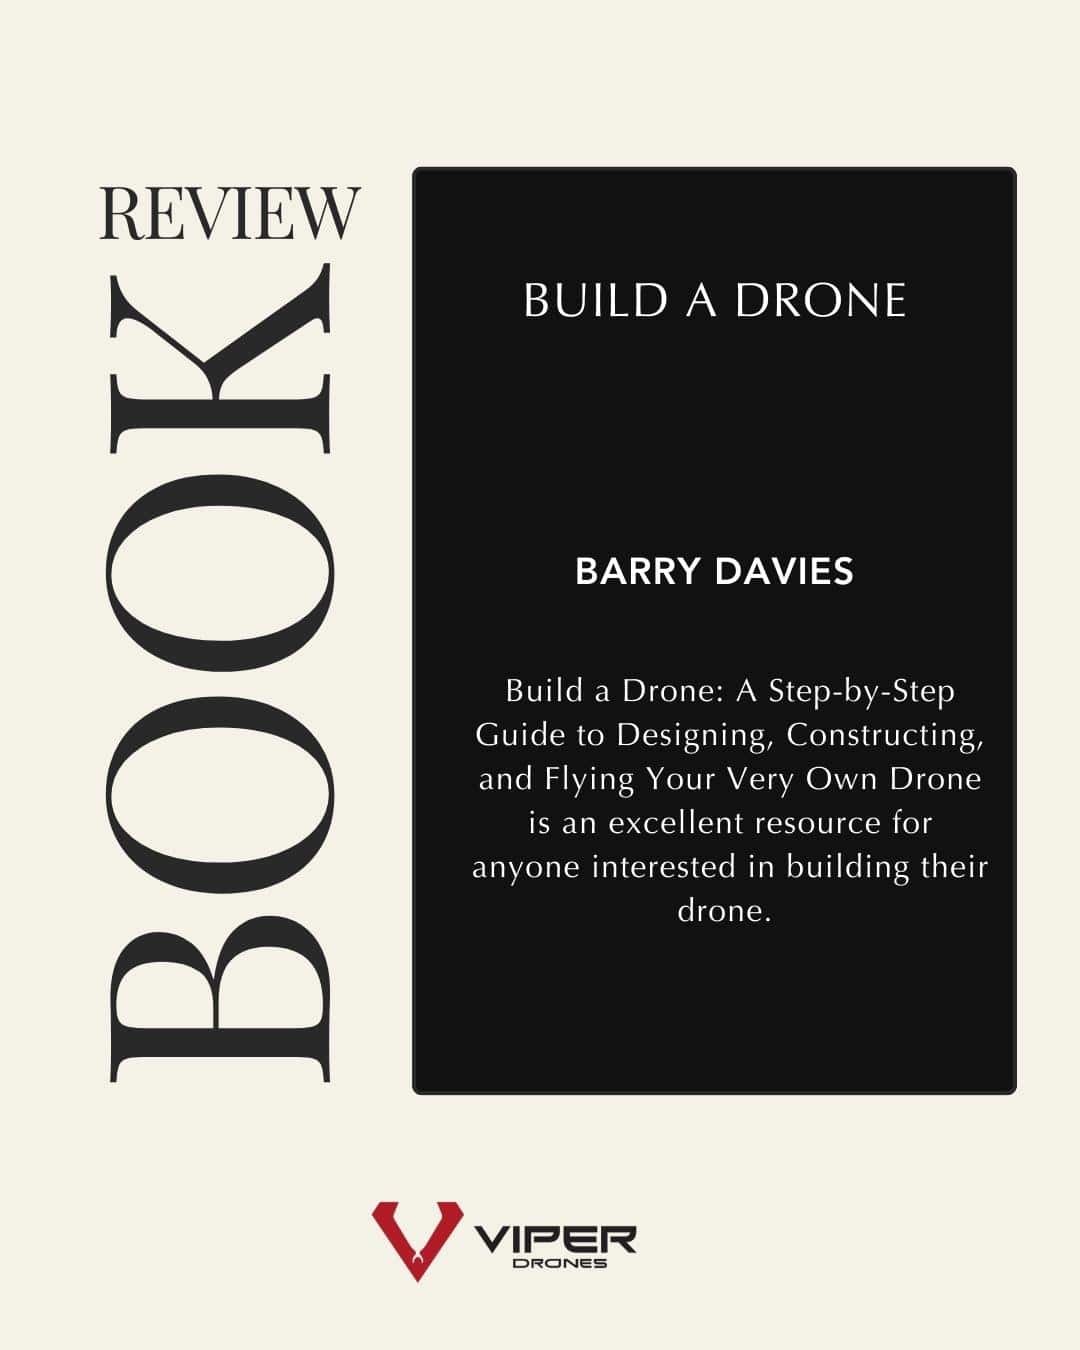 build a drone book review text